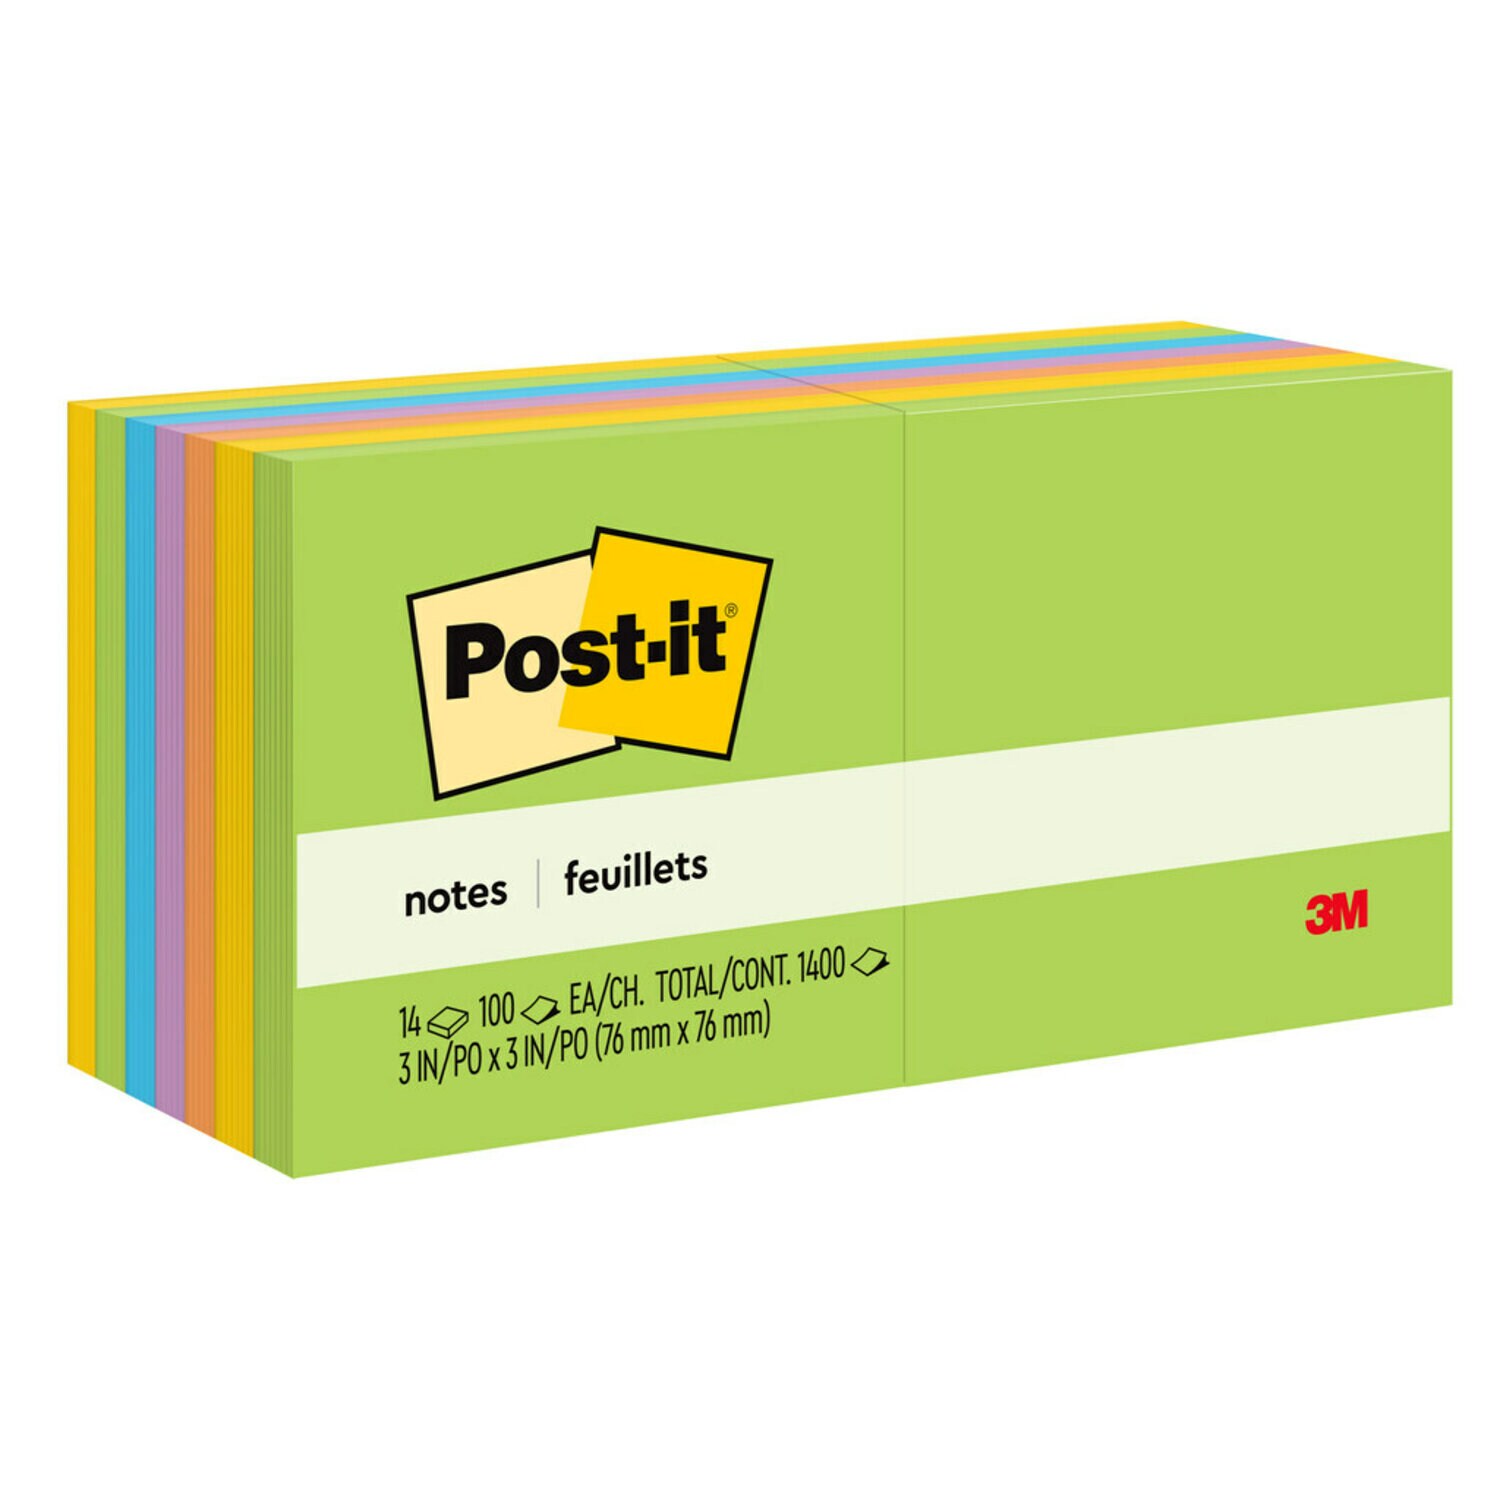 7100144884 - Post-it Notes, 654-14AU, 3 in x 3 in (76 mm x 76 mm), Jaipur colors, 14
Pads/Pack